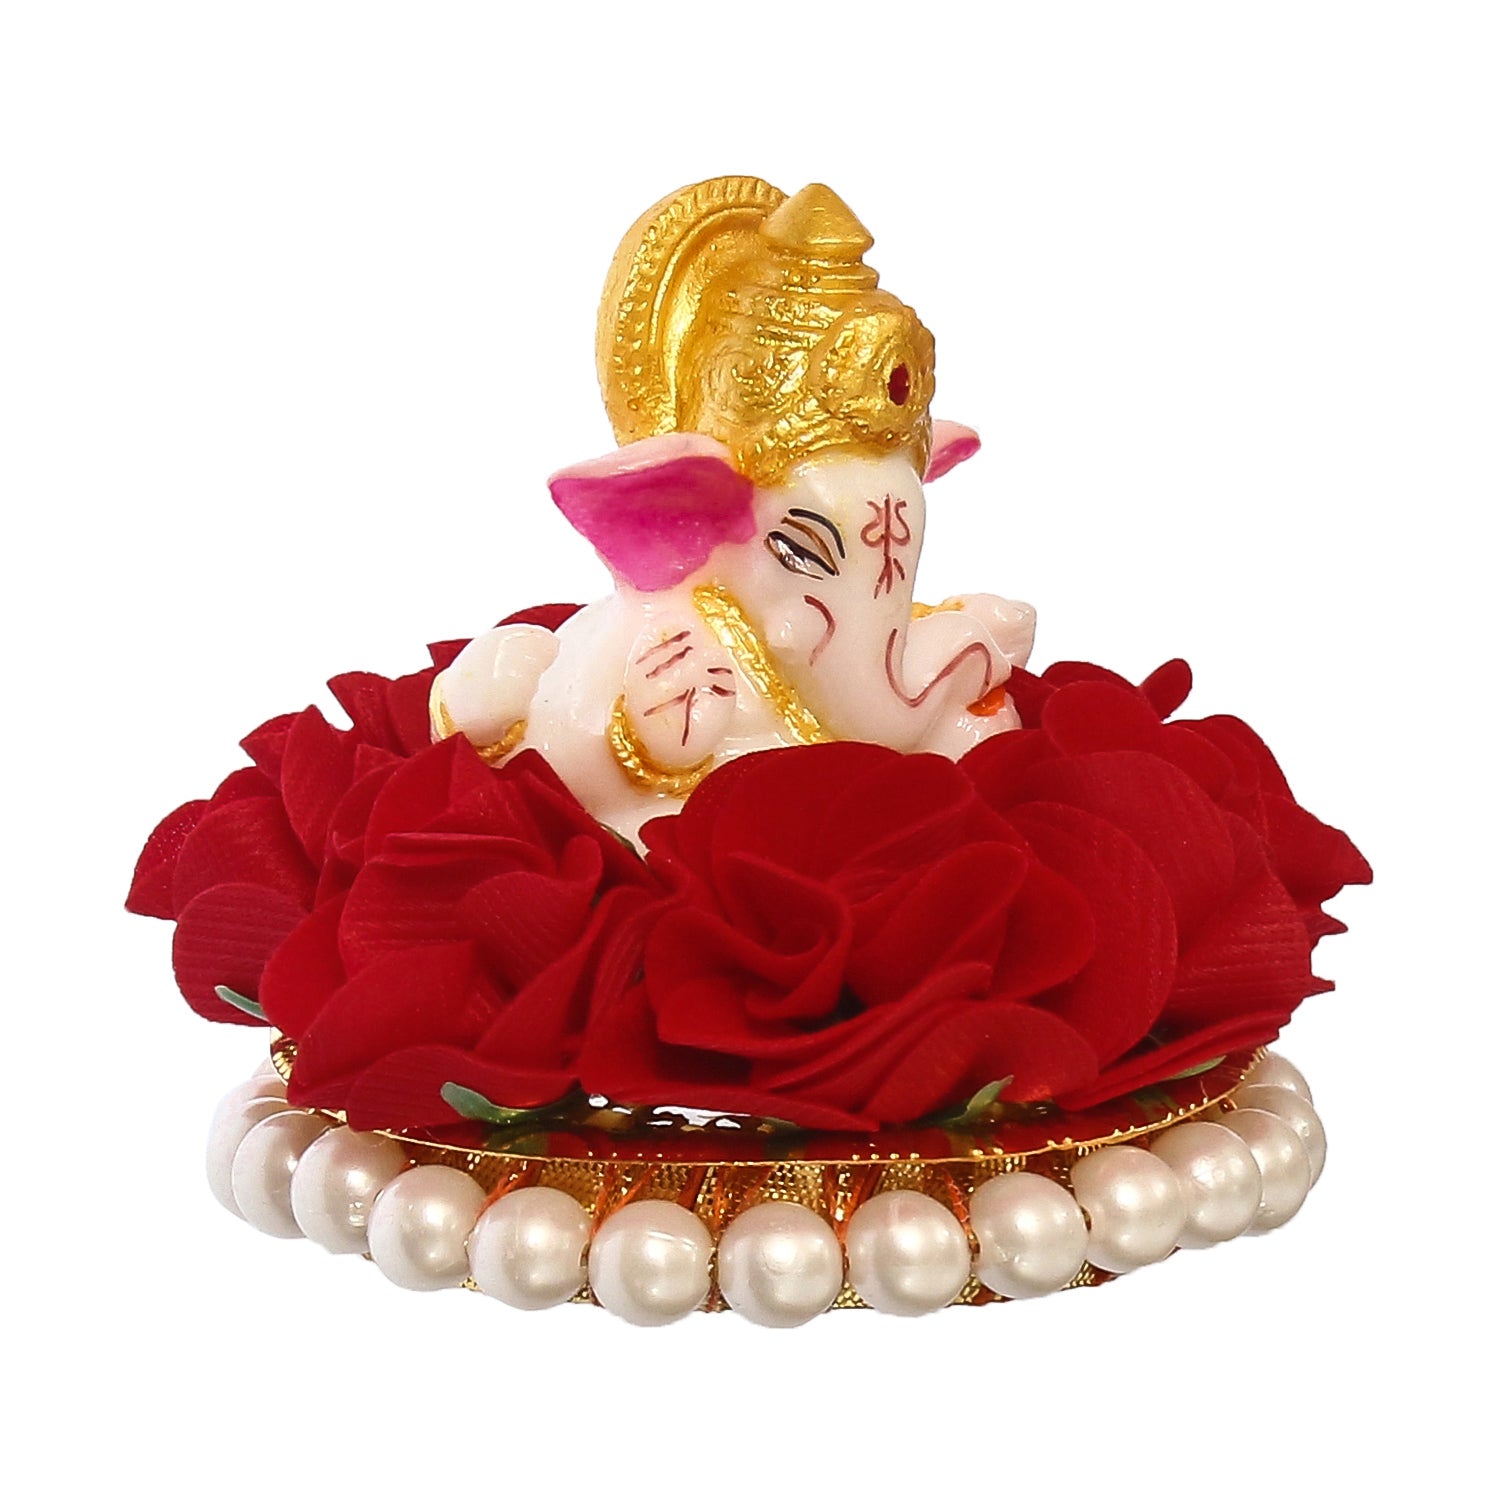 Lord Ganesha Idol on Decorative Handcrafted Plate with Red Flowers 4